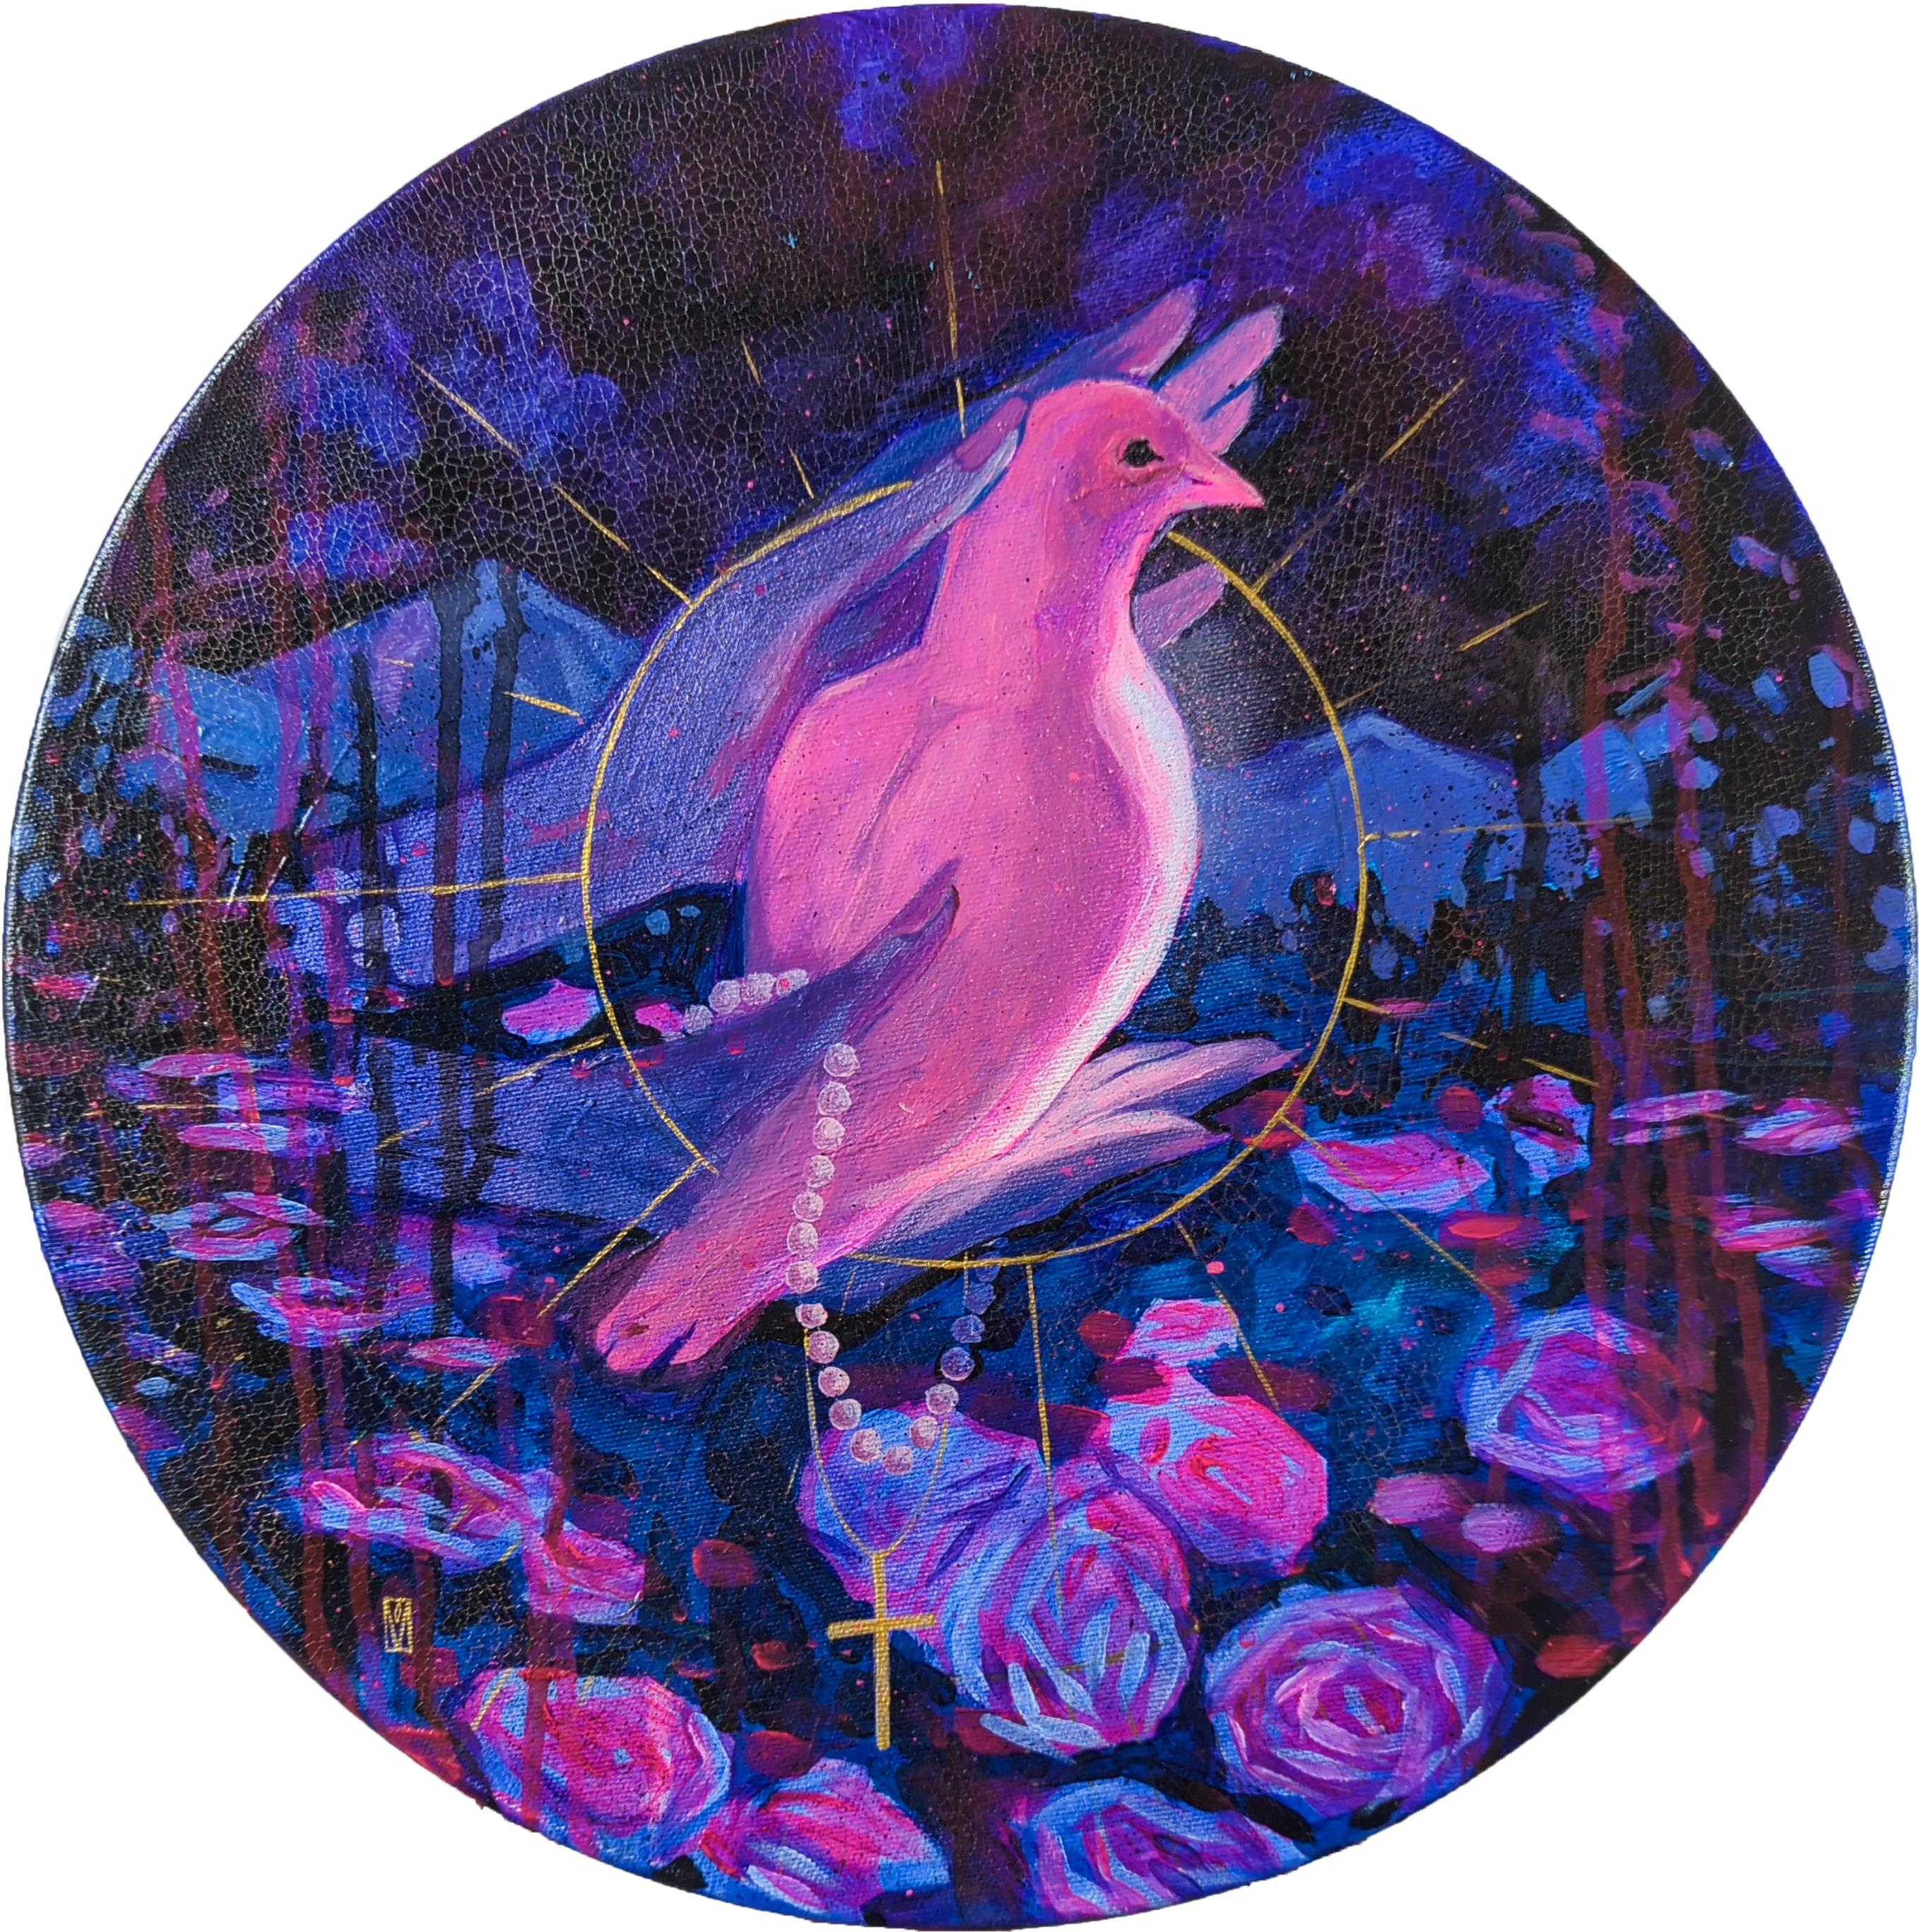 ITEM DETAILS

The edges are painted
Some parts of the picture glow under blue light
The painting's surface has a craquelure effect

ABOUT THE ARTWORK

This painting is a delicate and emotional depiction of love and faith. The dove in the palm,